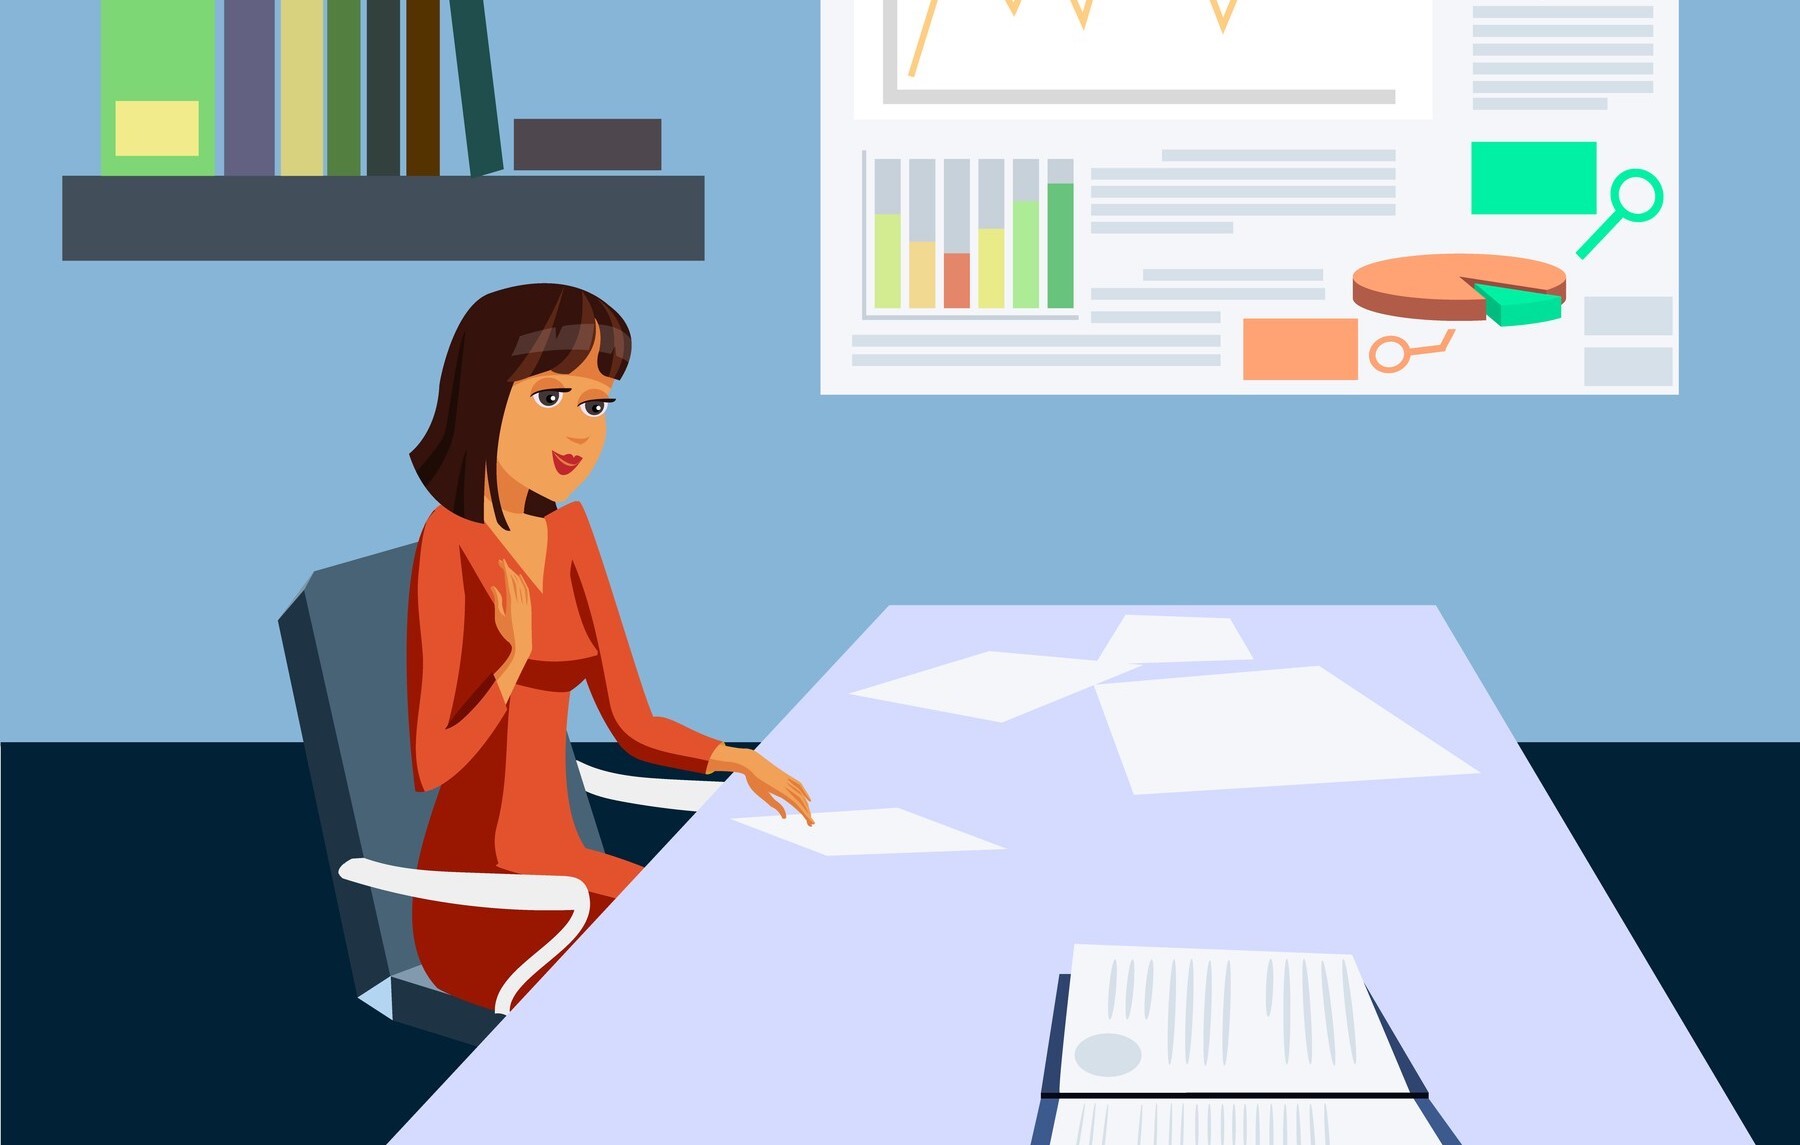 Businesswoman in Working Office Flat Illustration. Female Boss, Investor, Trader Cartoon Character. Successful, Confident, Wealthy Woman. Documents on Desk, Graph Growth Vector Drawing